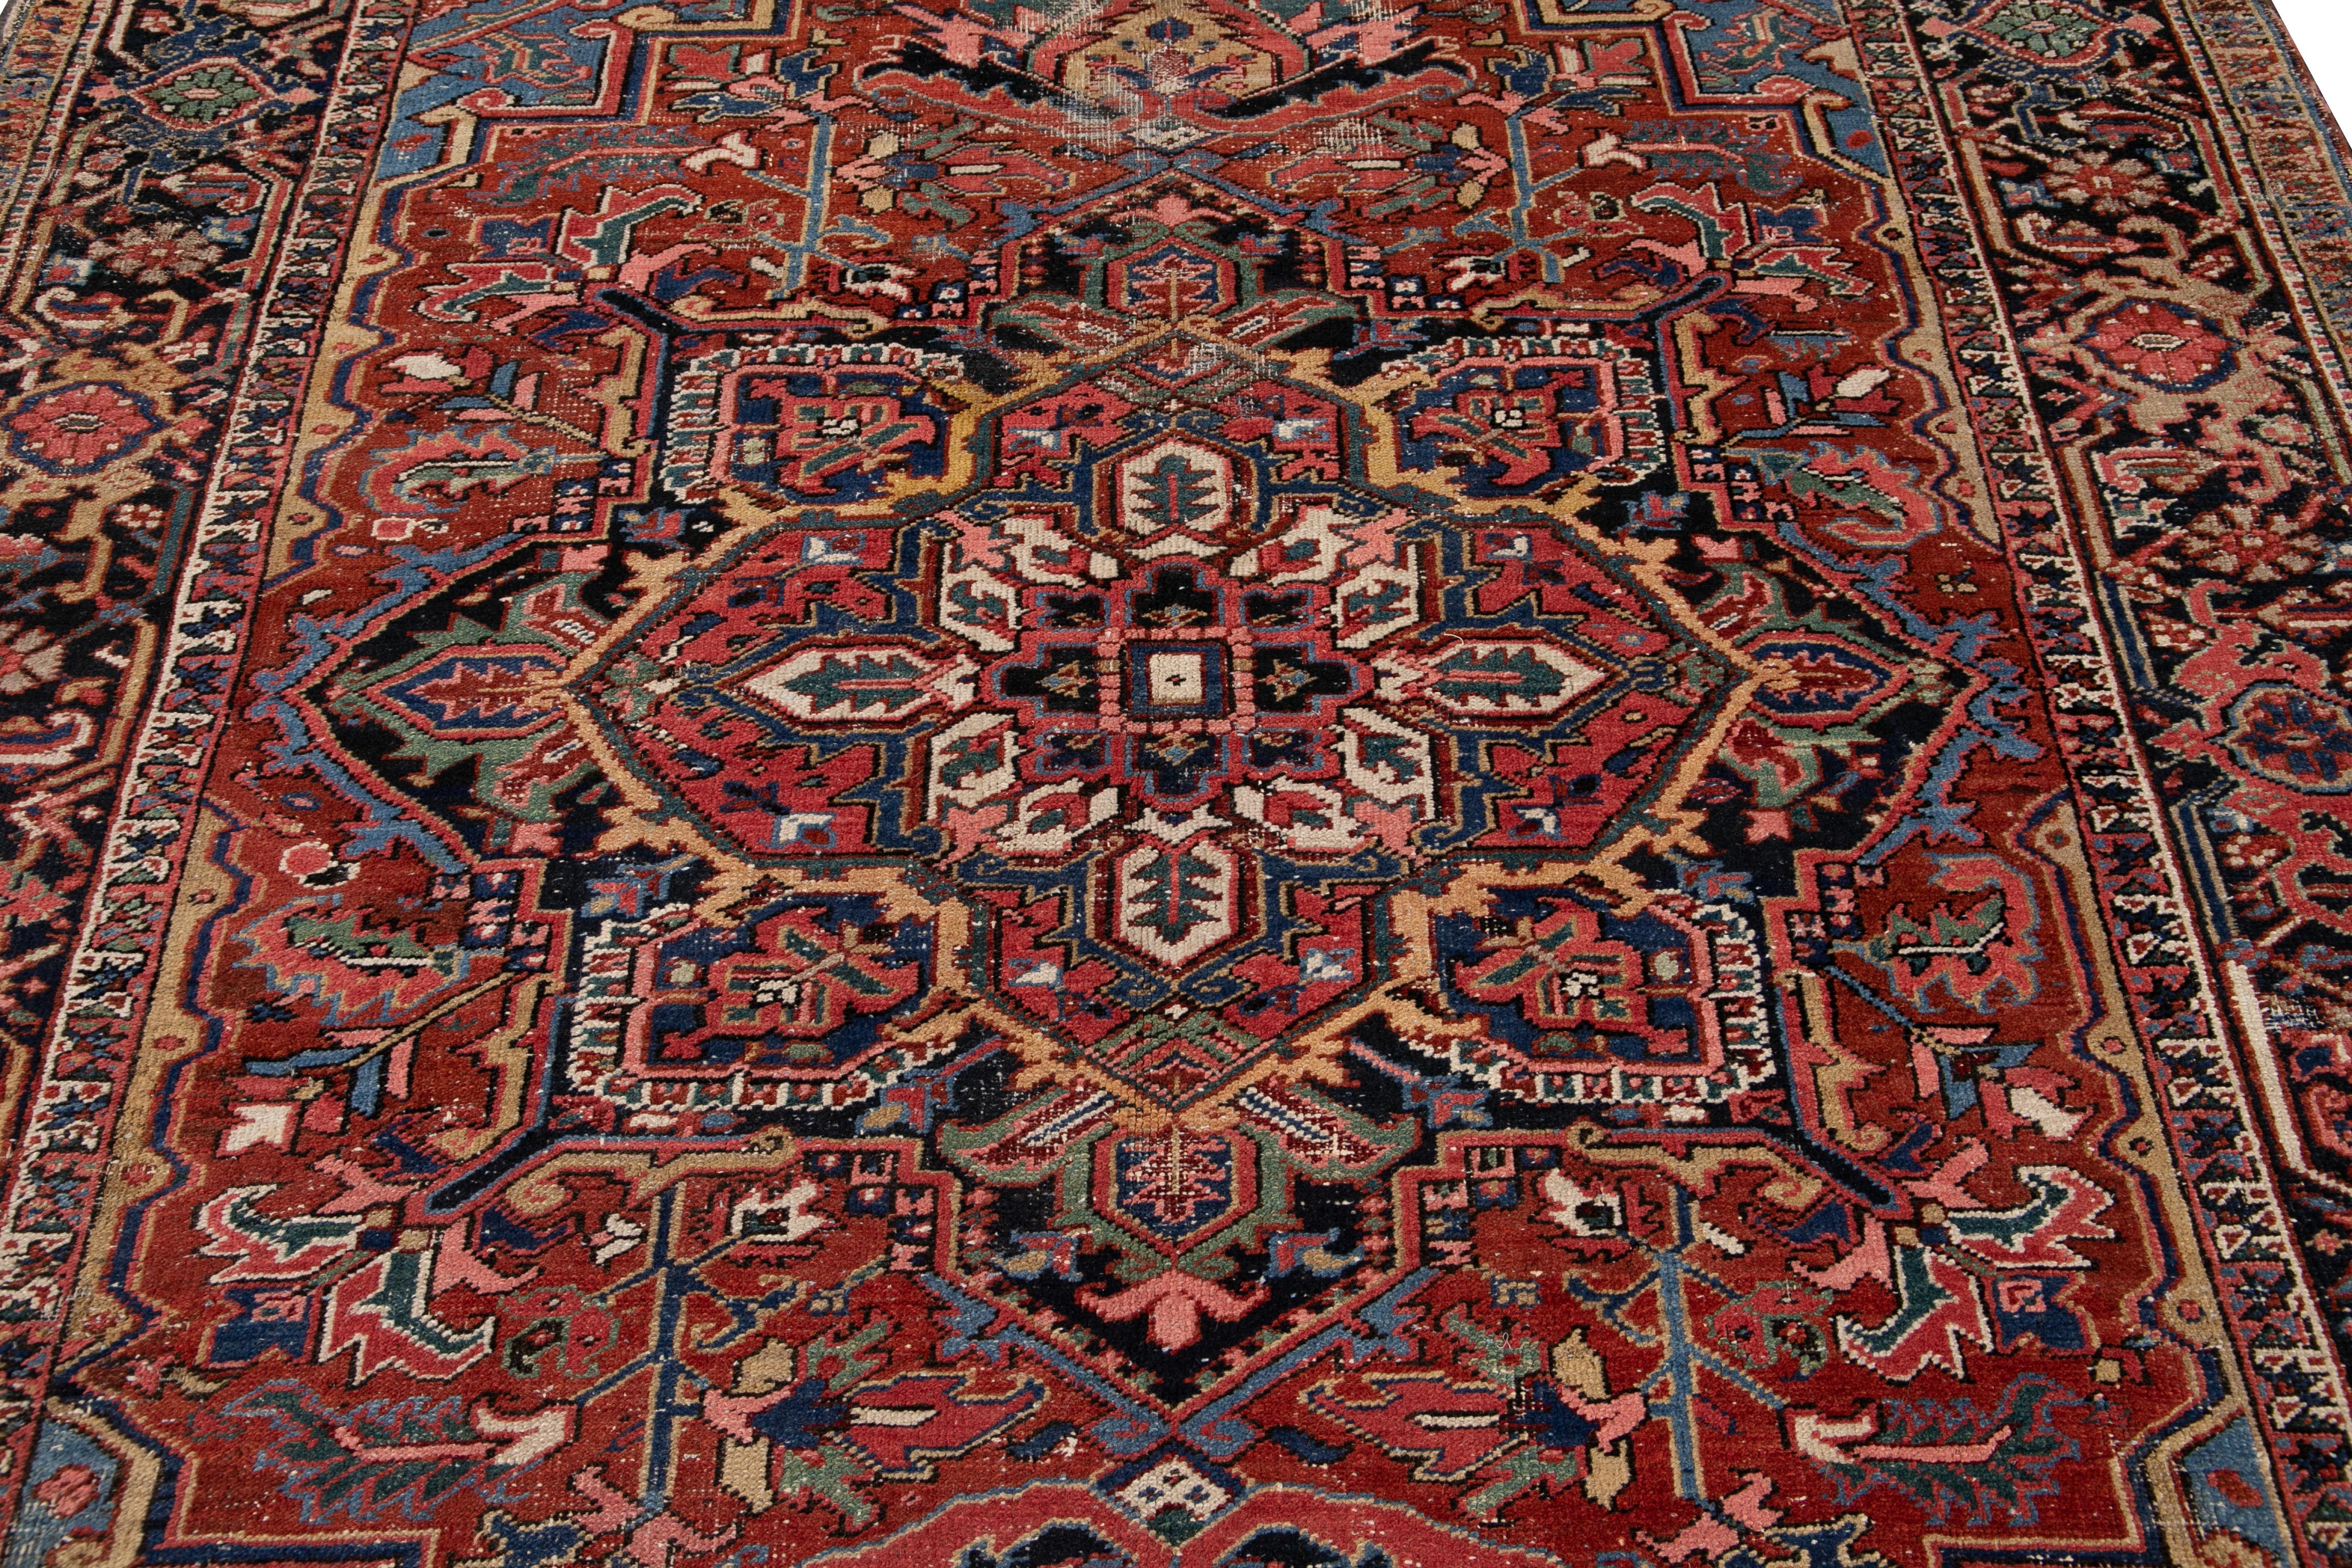 Beautiful antique Persian Heriz hand knotted wool rug with rust and blue field. This Heriz rug has a navy-blue frame and multi-color accents in an all-over gorgeous geometric medallion floral design.

This rug measures: 7'3